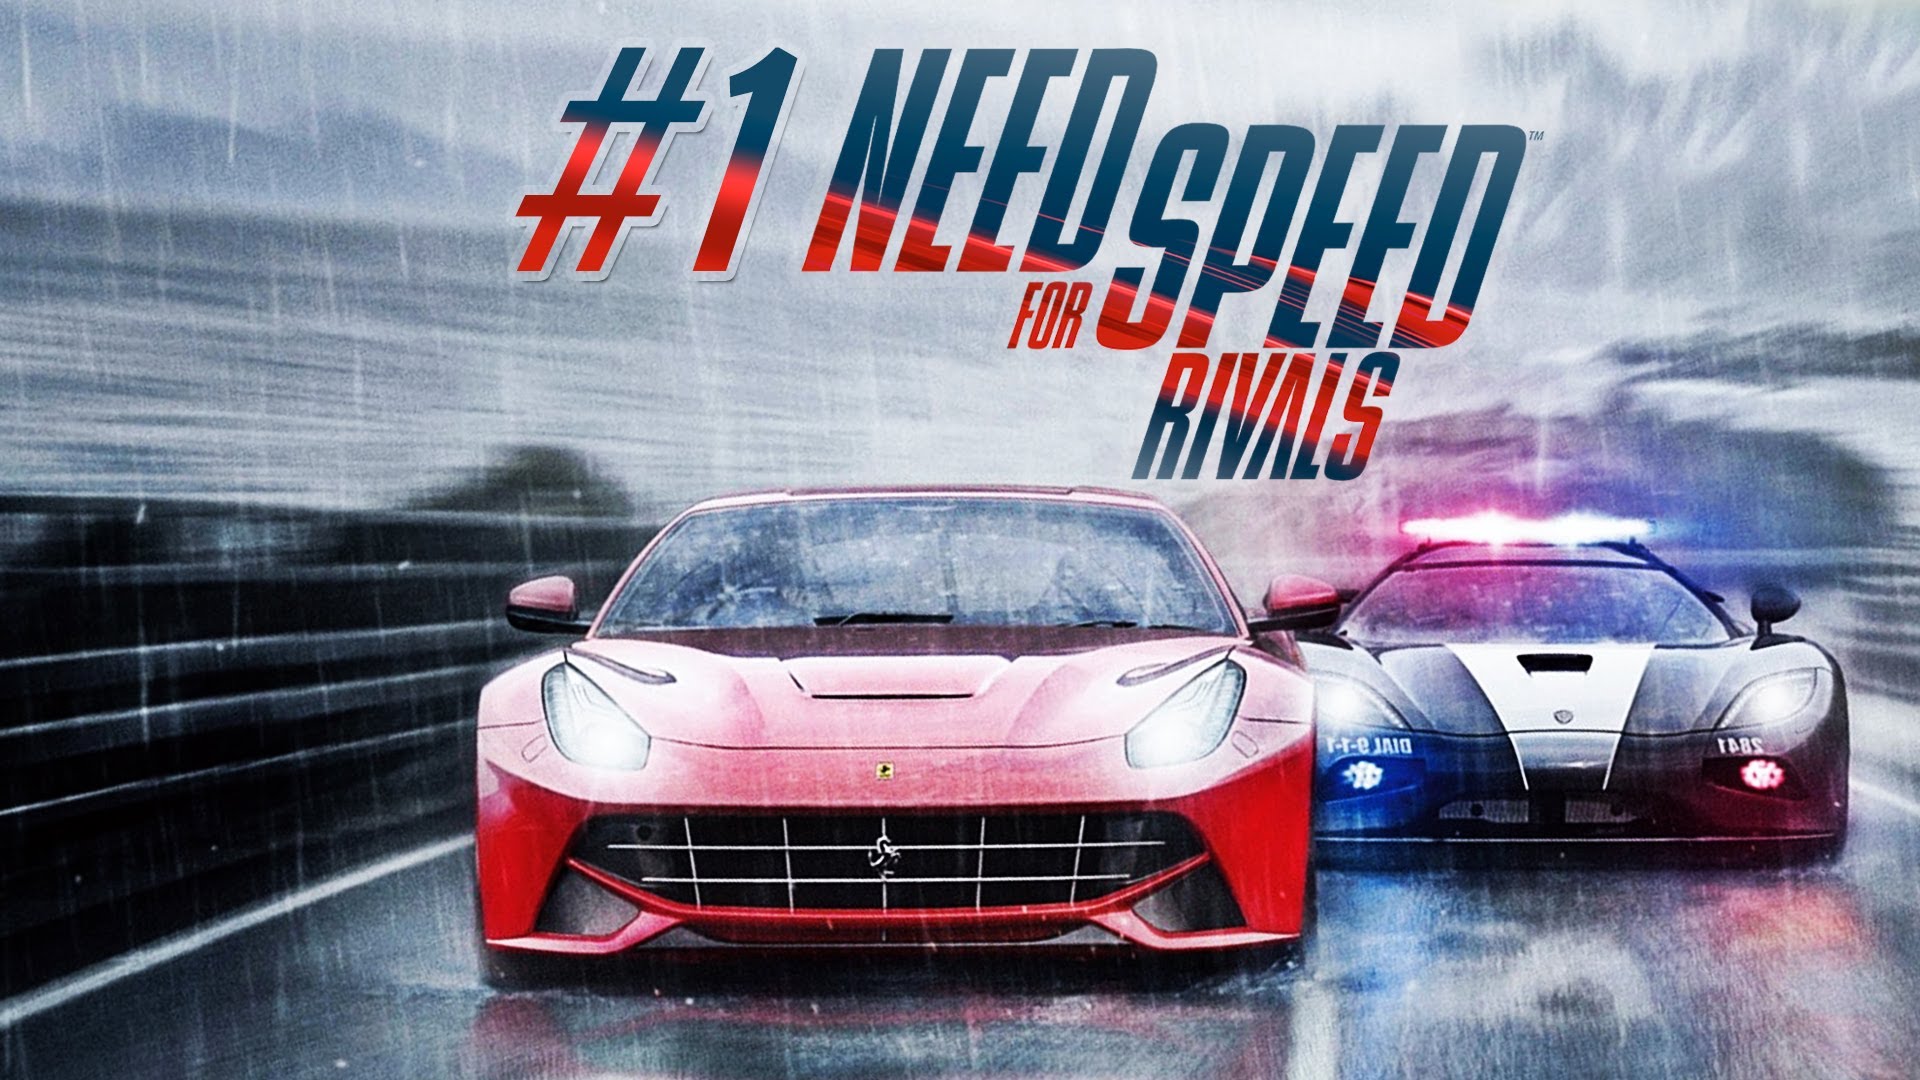 HD need for speed rivals wallpapers